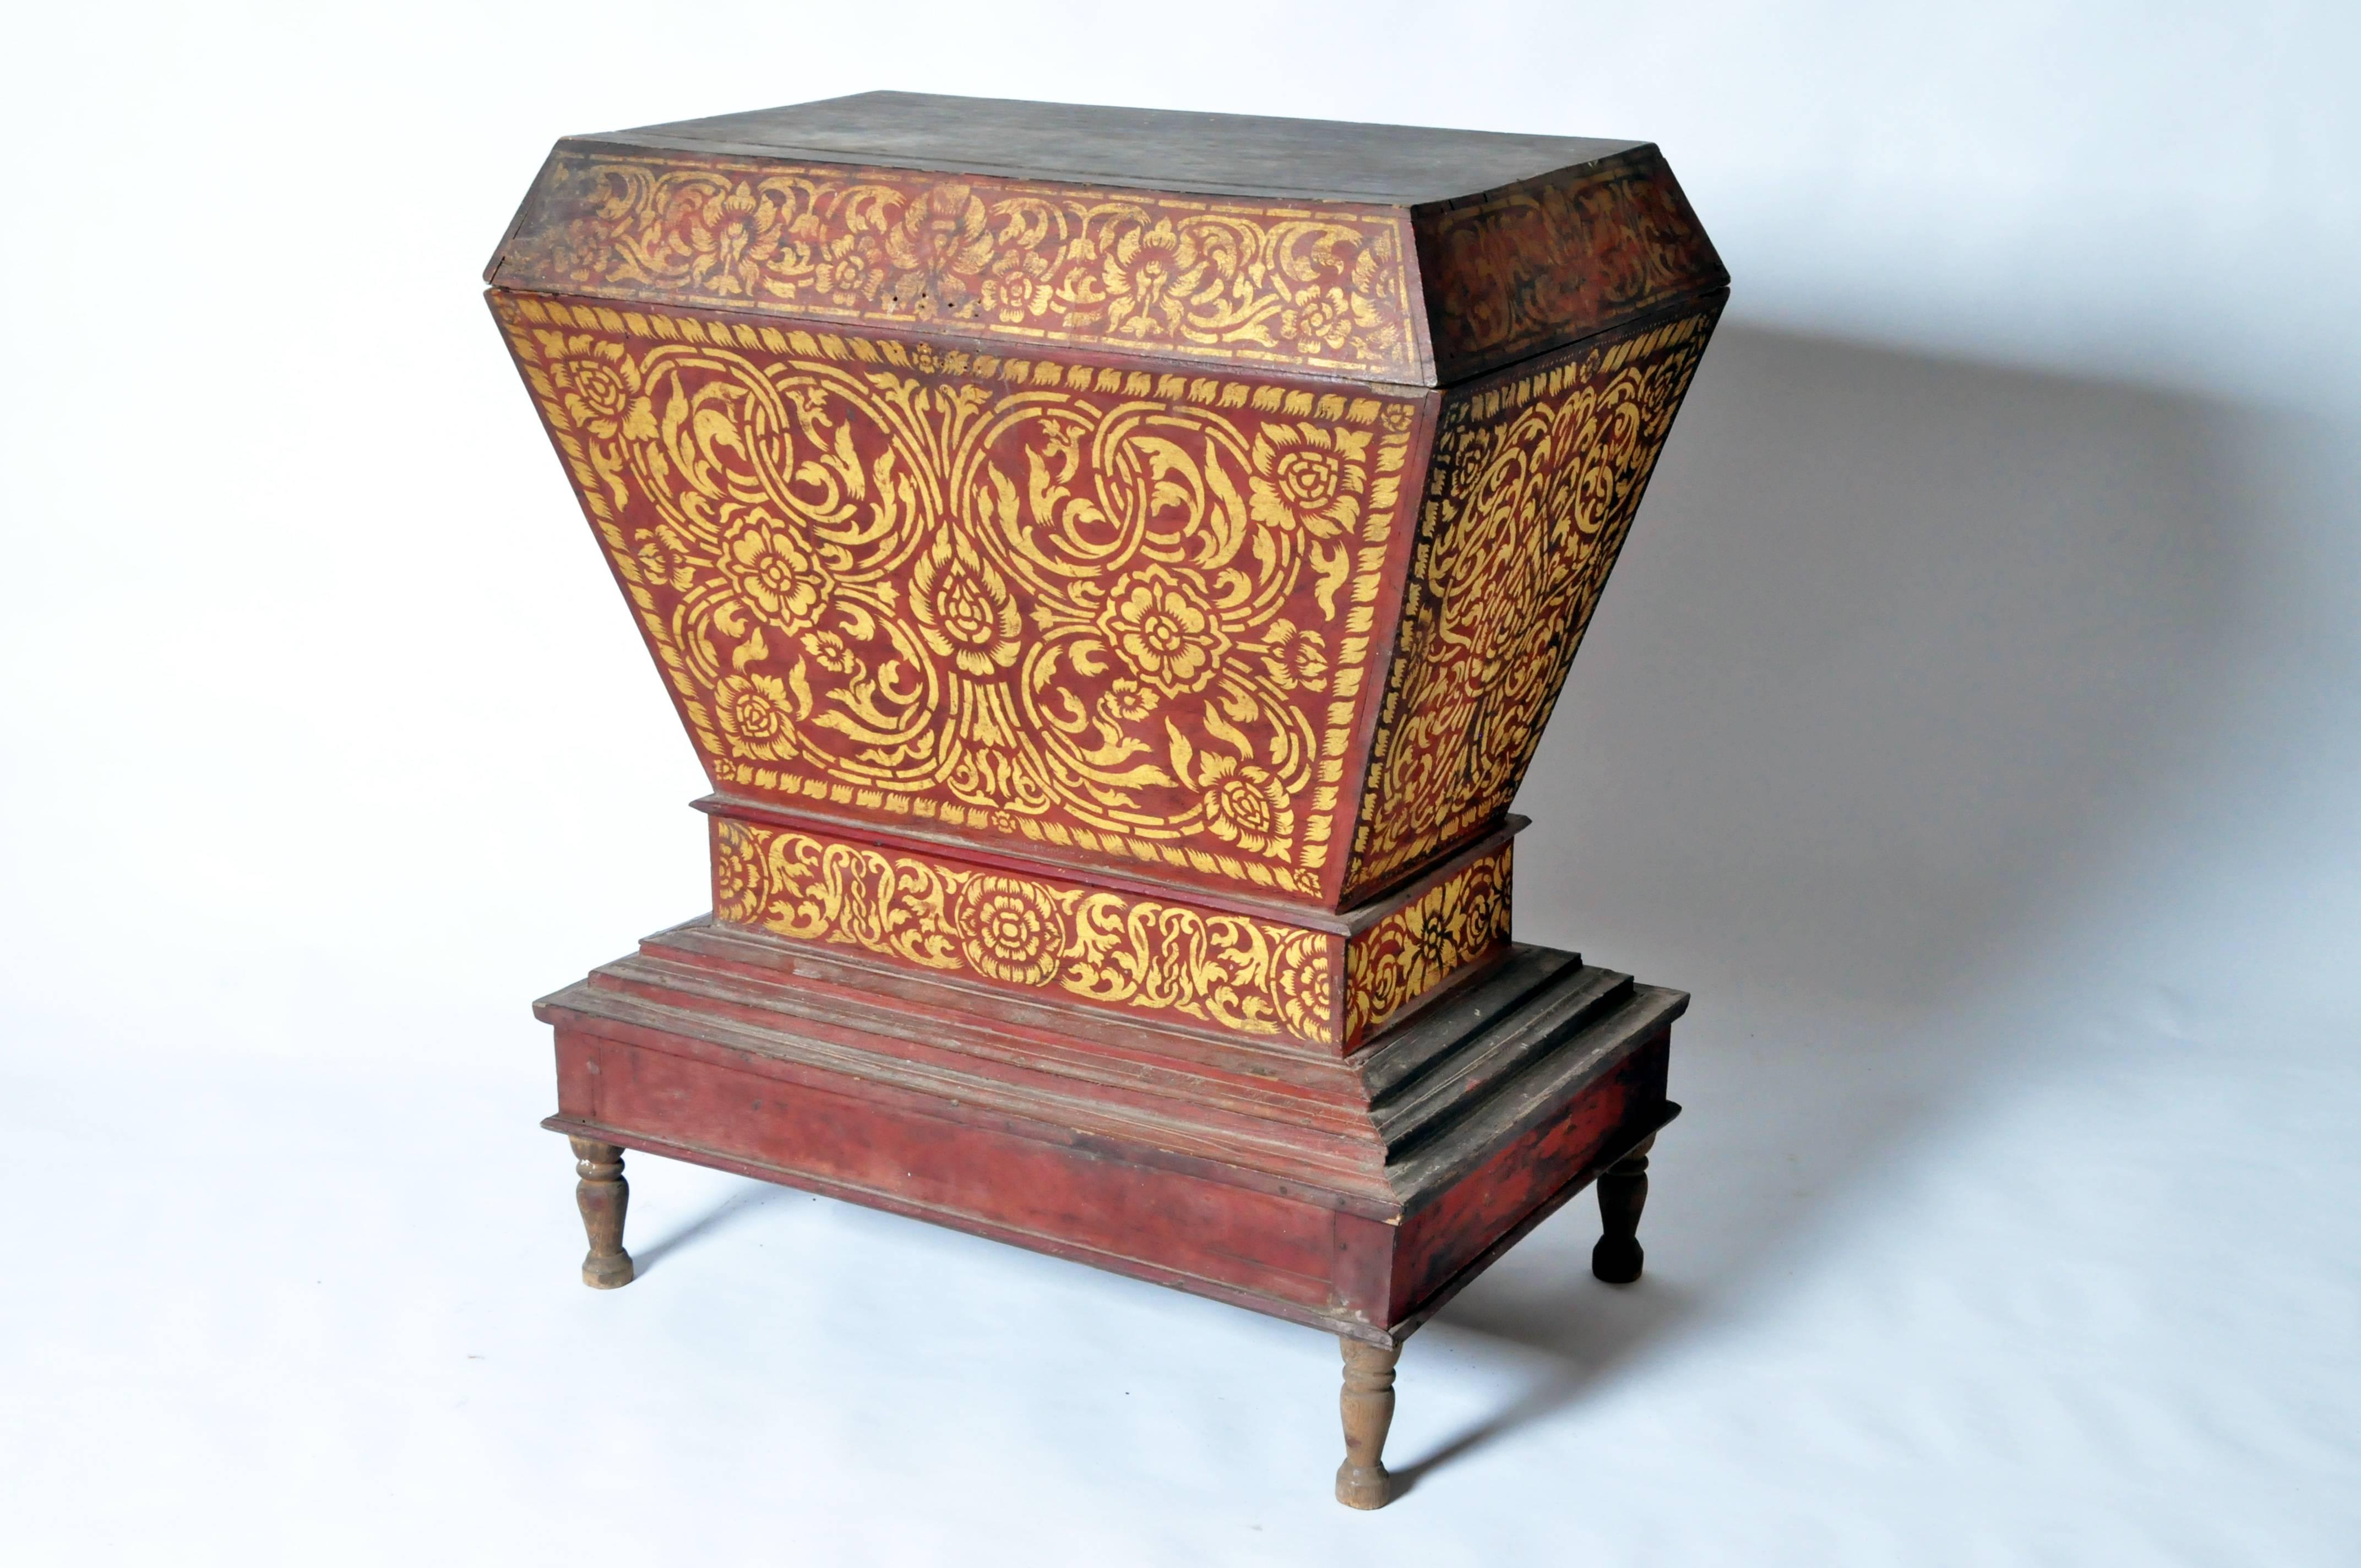 This elegant Lanna Thai manuscript chest features red lacquer with gold motifs. It was made in the early 20th century and has a beautifully aged patina.